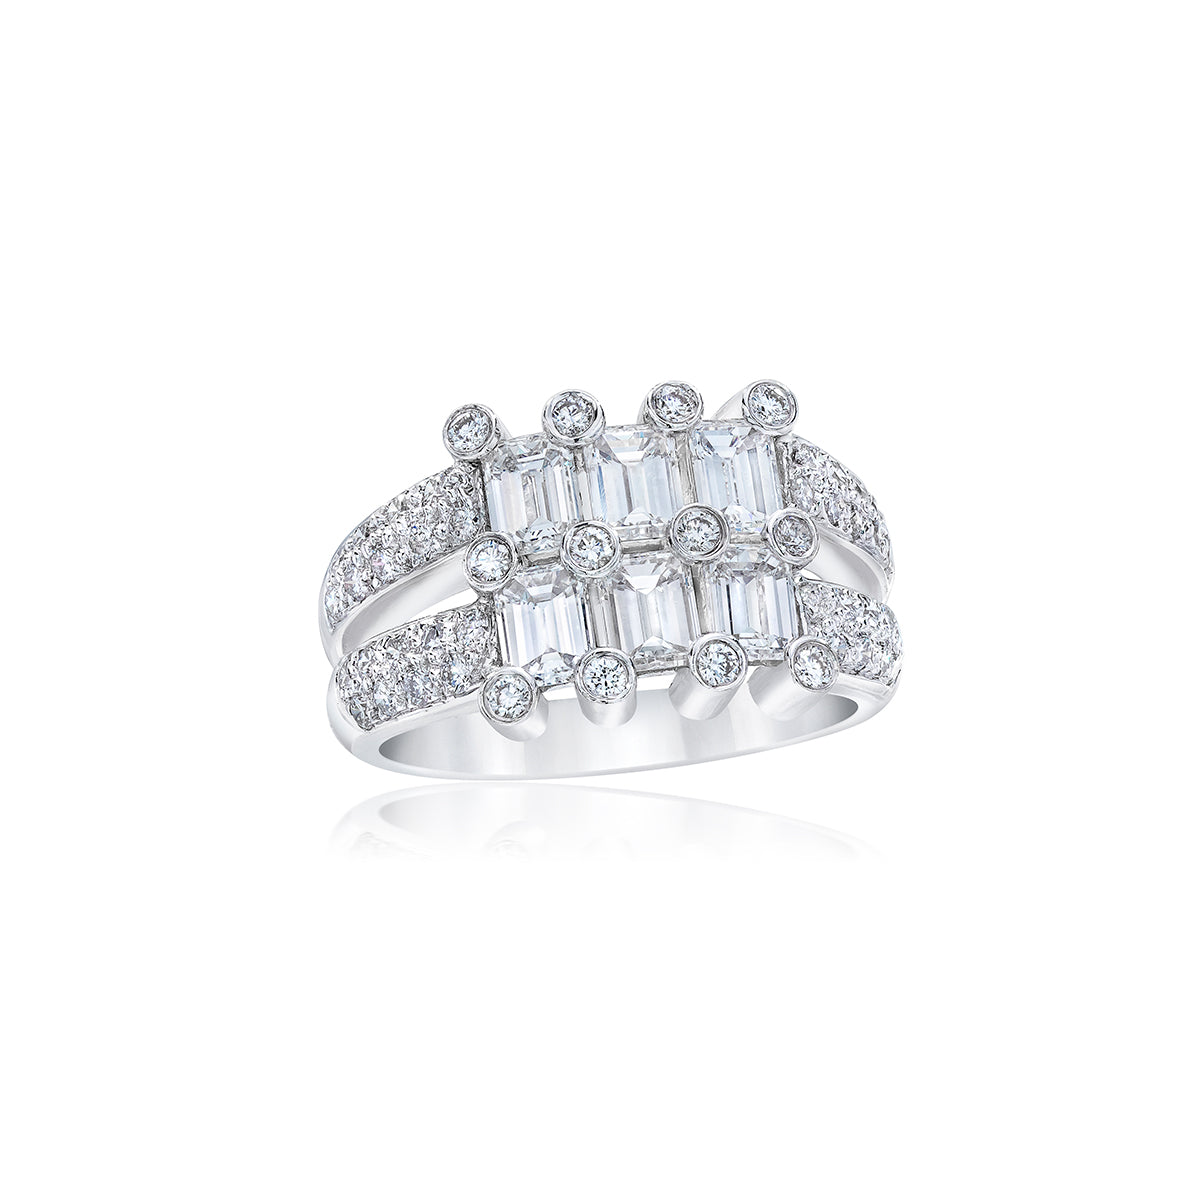 Two Tier Emerald Cut Diamond and Platinum Ring